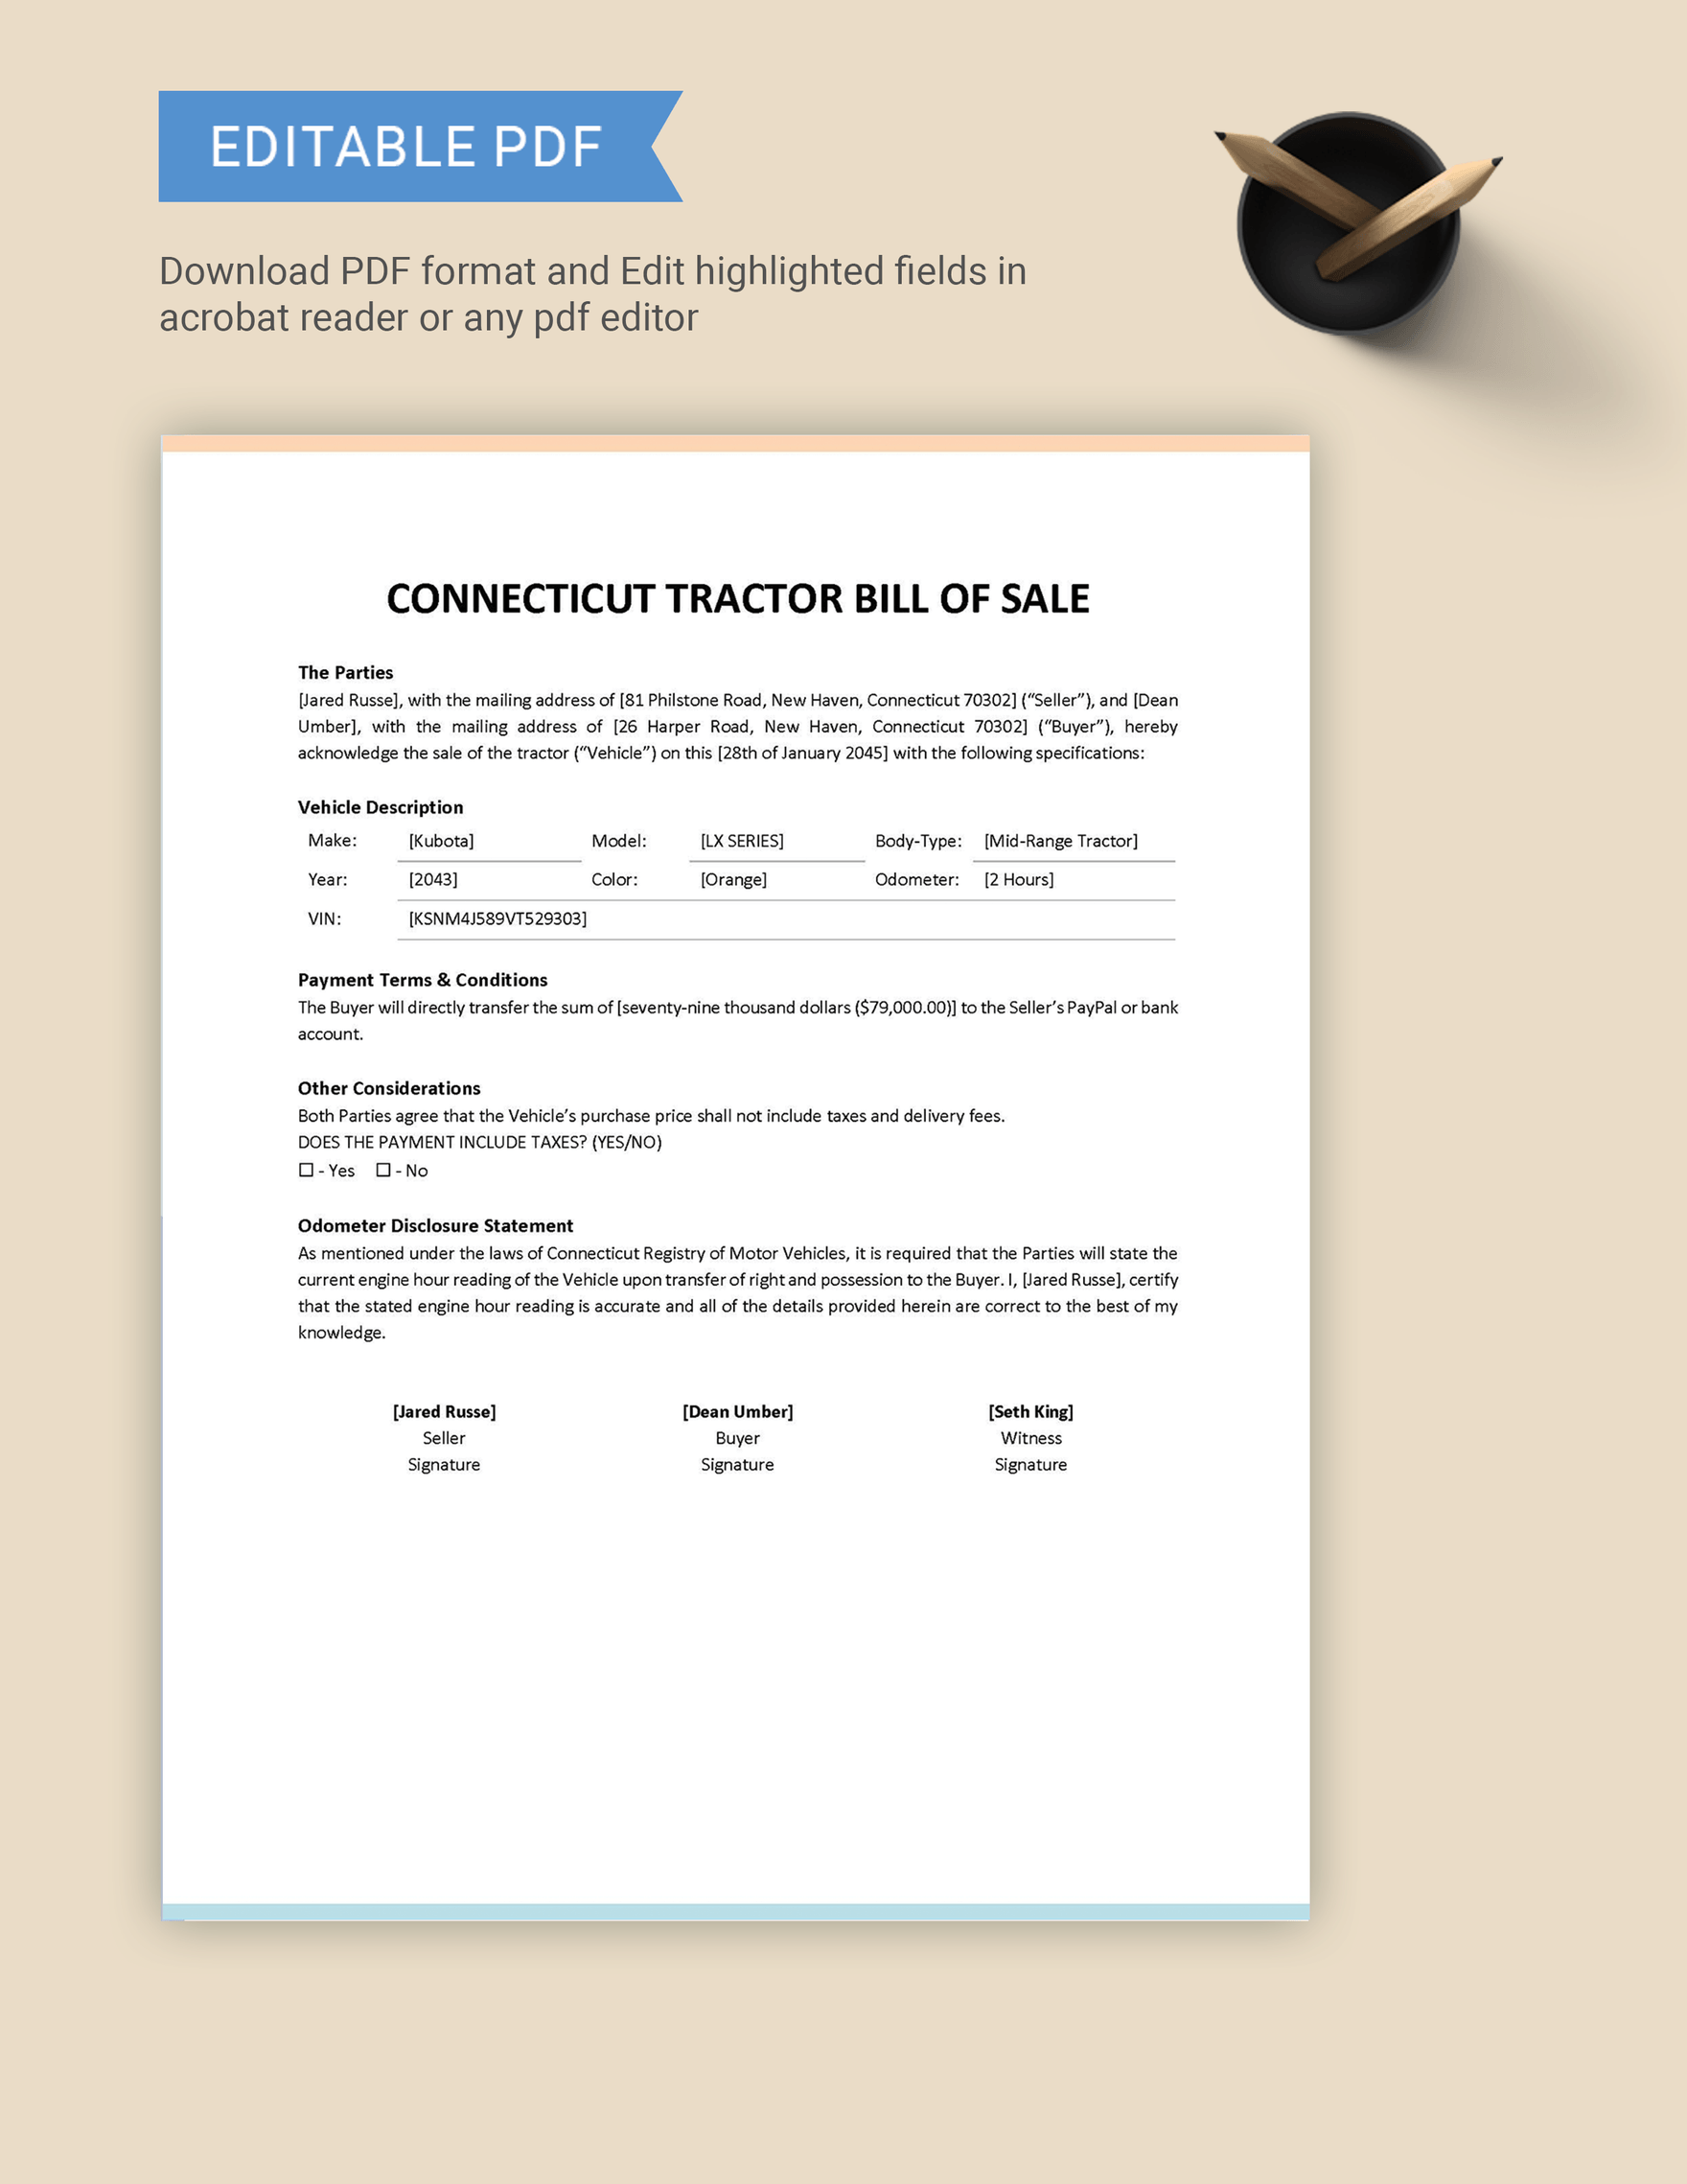 Connecticut Tractor Bill of Sale Template